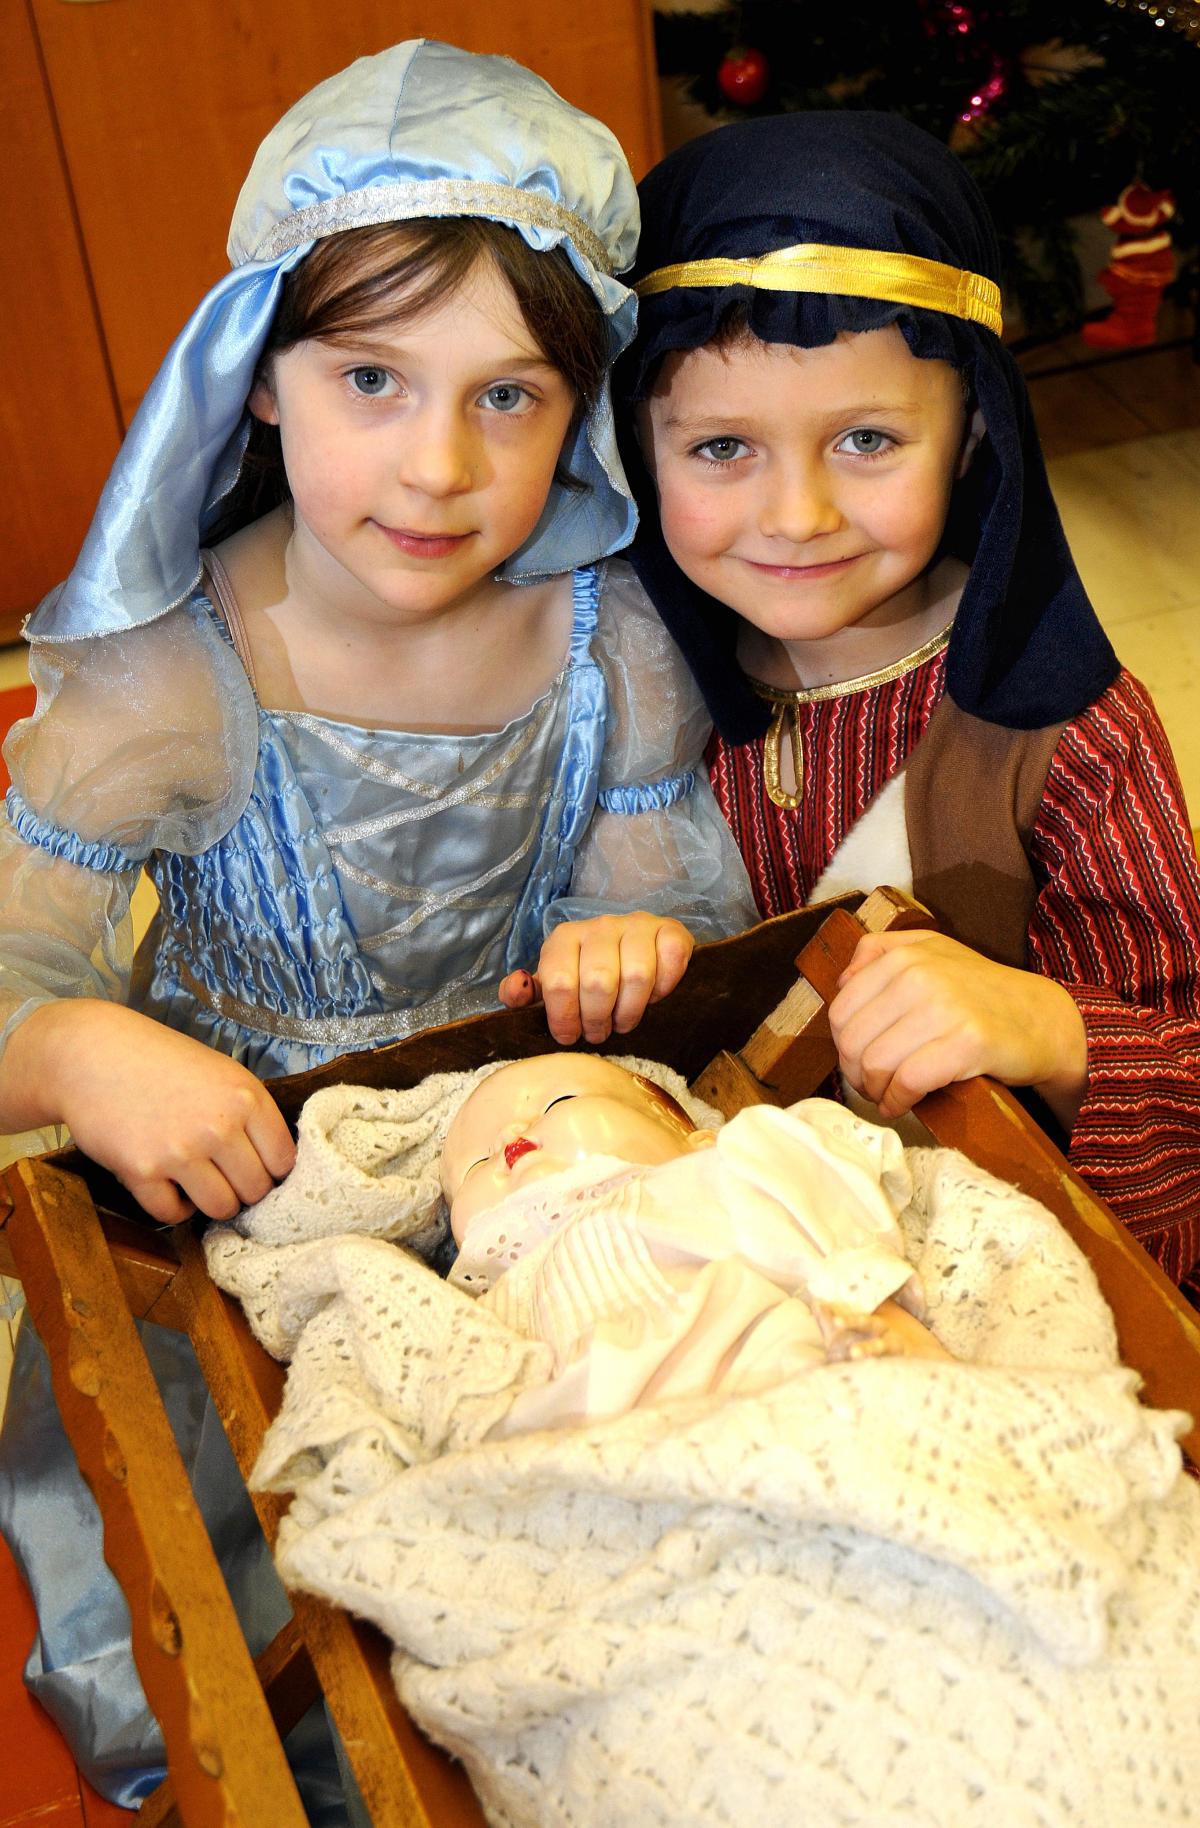 Appearing in St Mary's RC Primary School, Horsforth, Nativity were Phoebe Cliff and William Salmon as Mary and Joseph